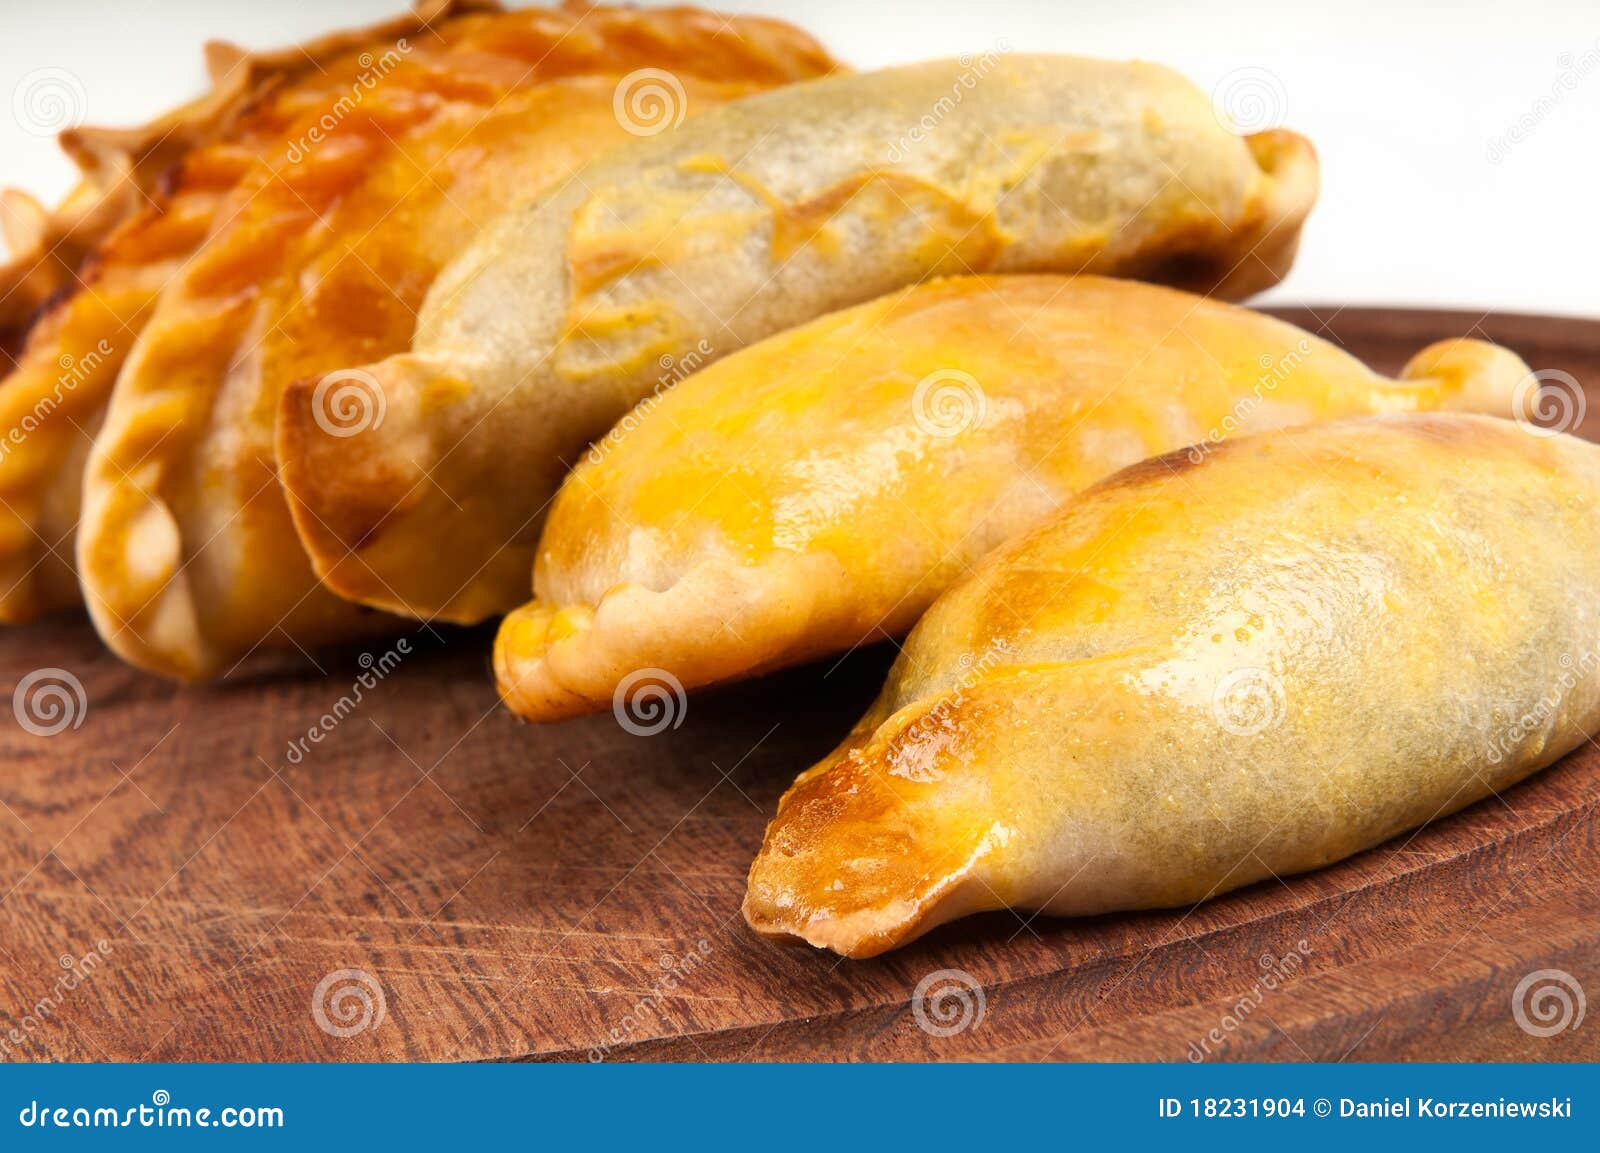 empanada close up over wooden table.